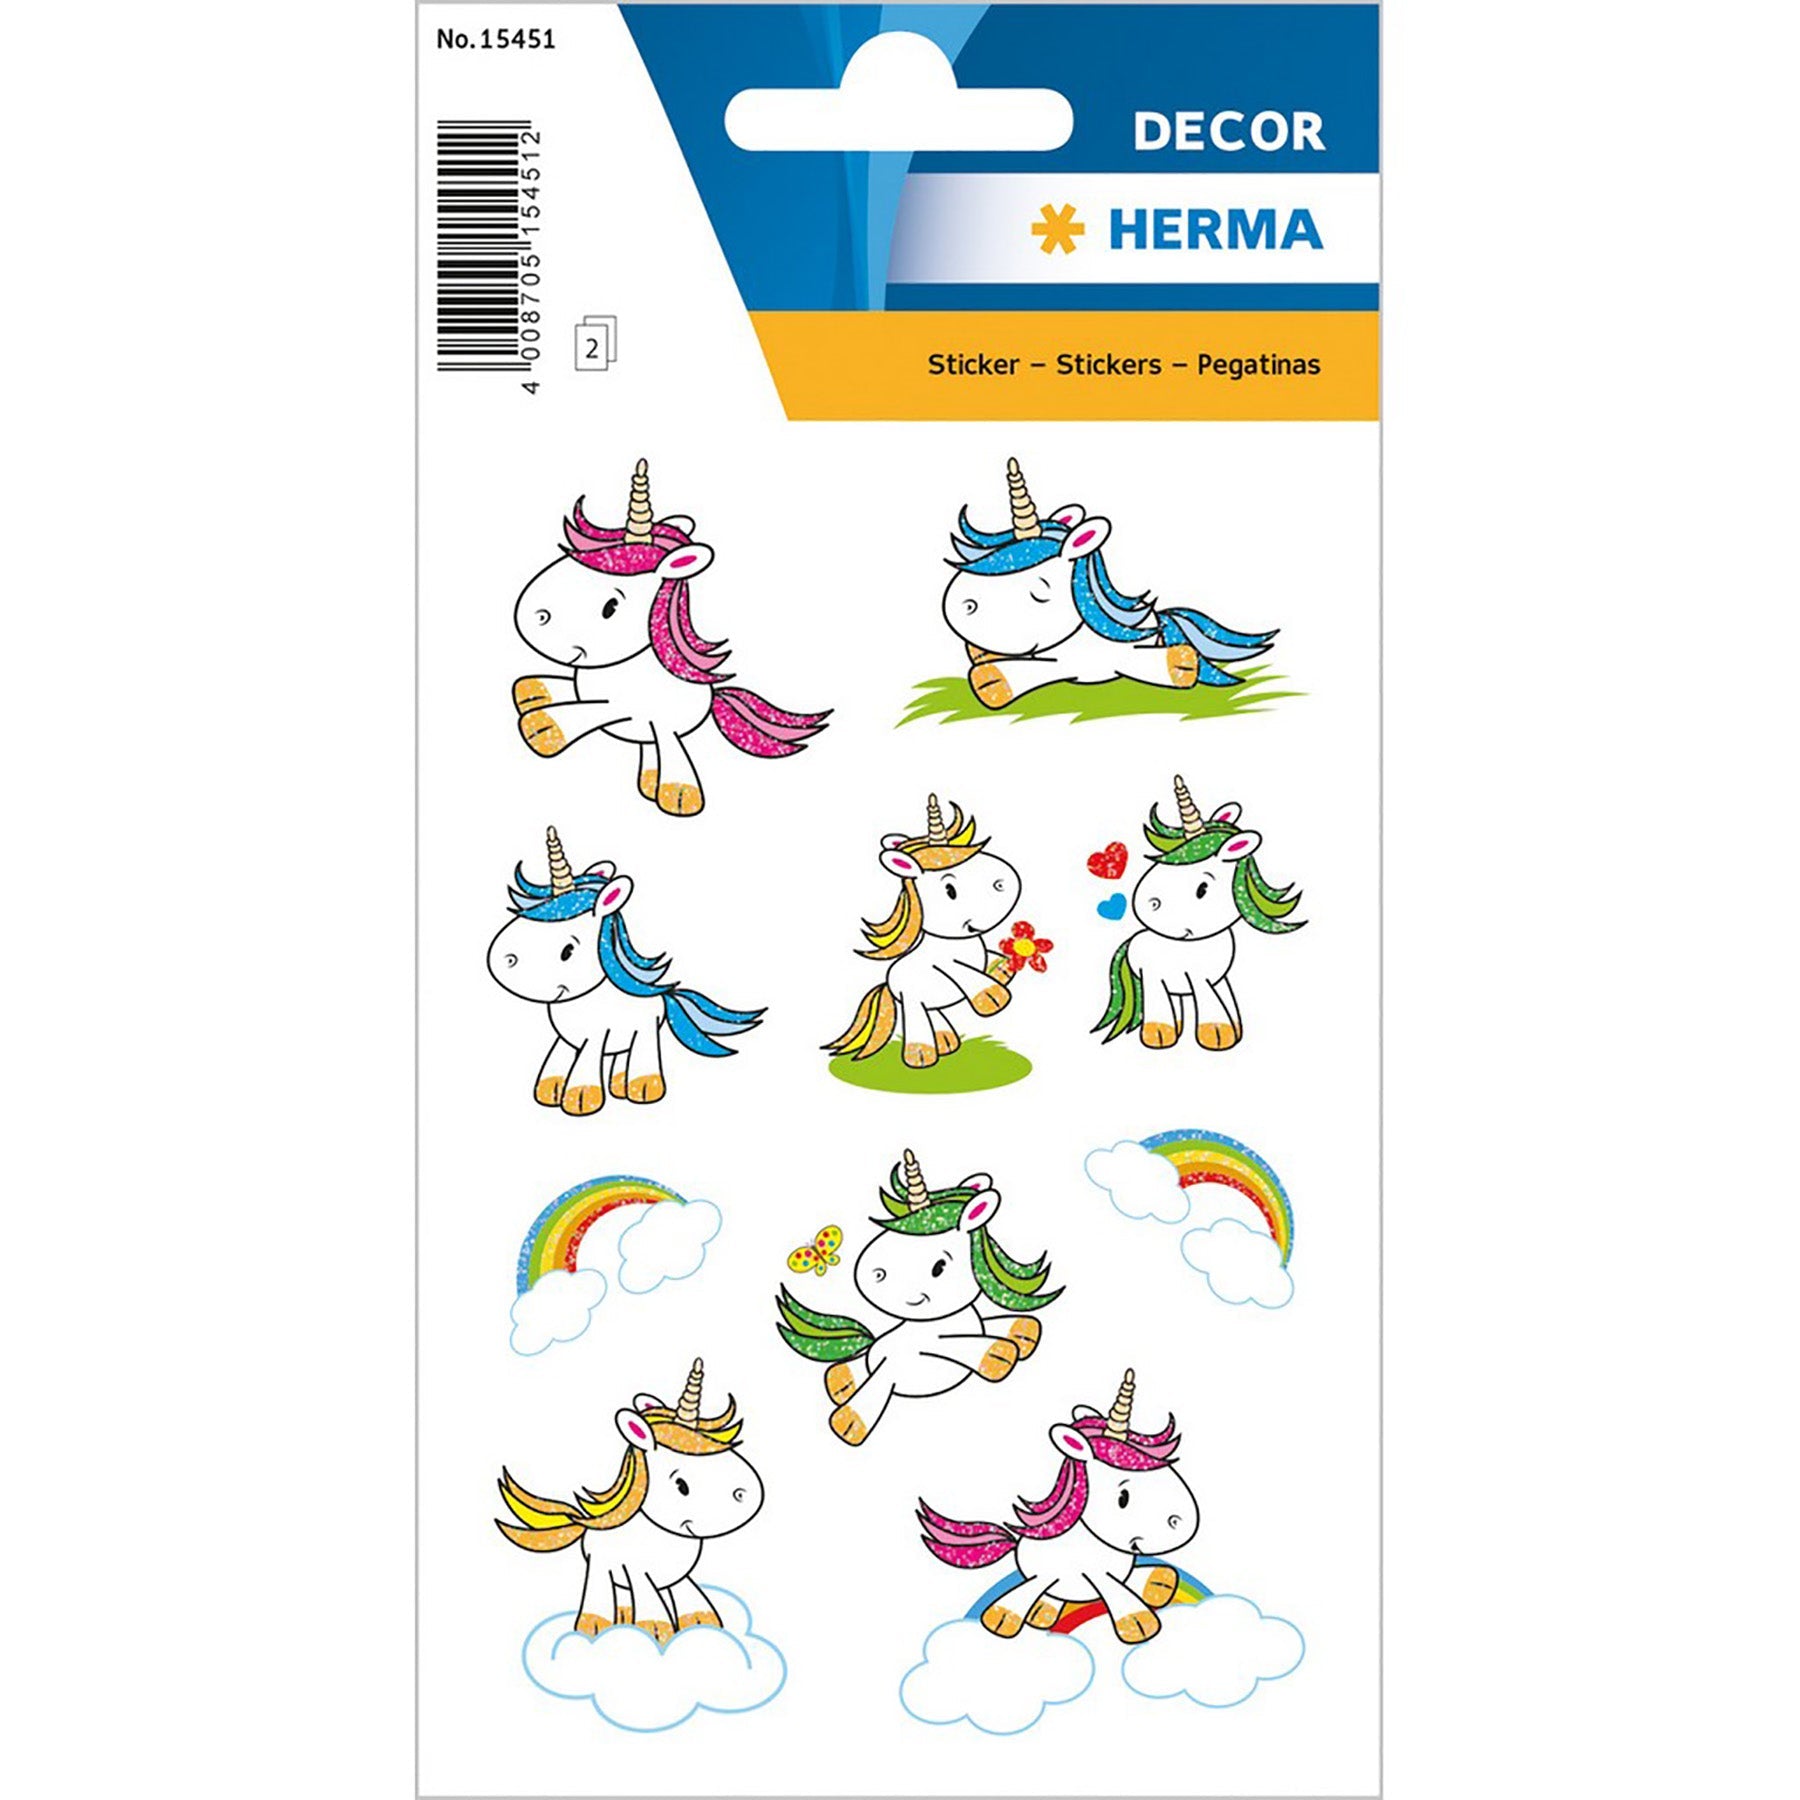 Herma Décor 2 Sheets Stickers Baby Unicorn Glitter 4.75x3.1in Sheet